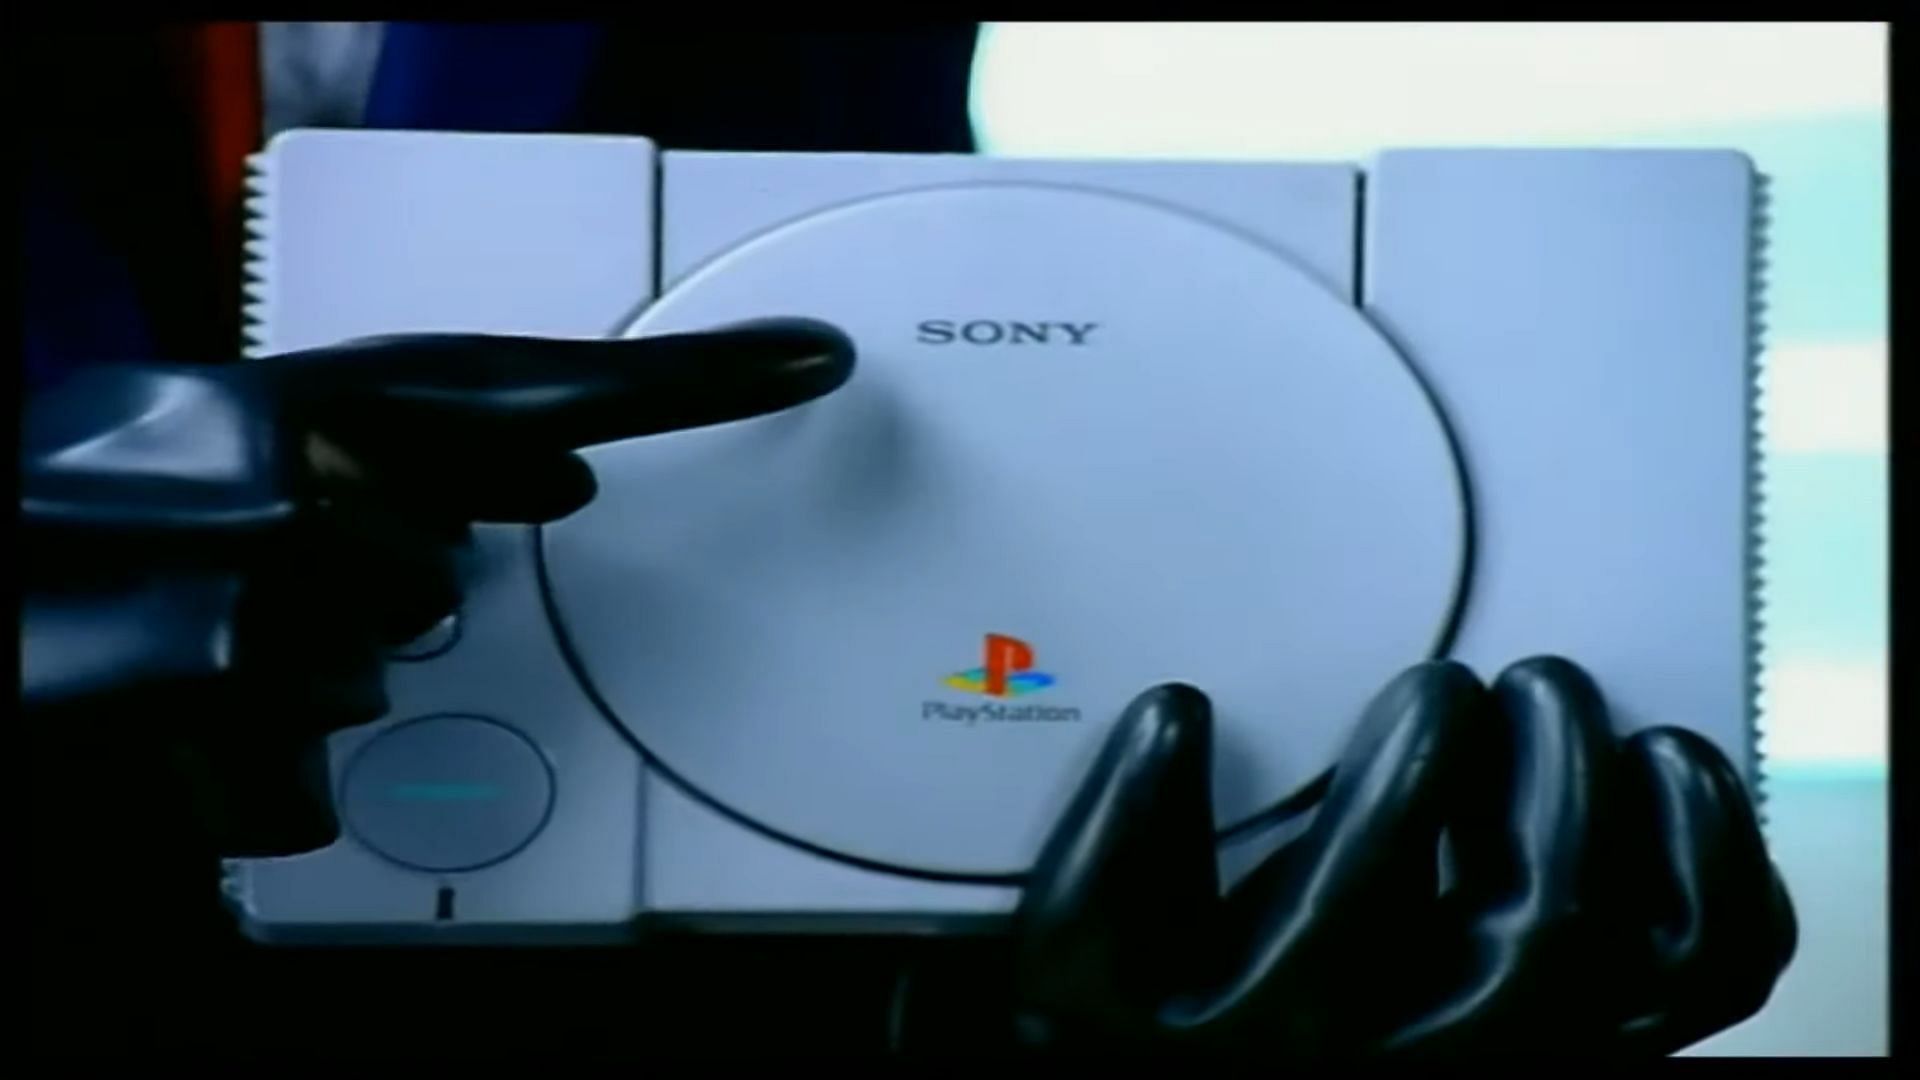 The Sony PS1 (Image via YouTube/Way of the Lost)